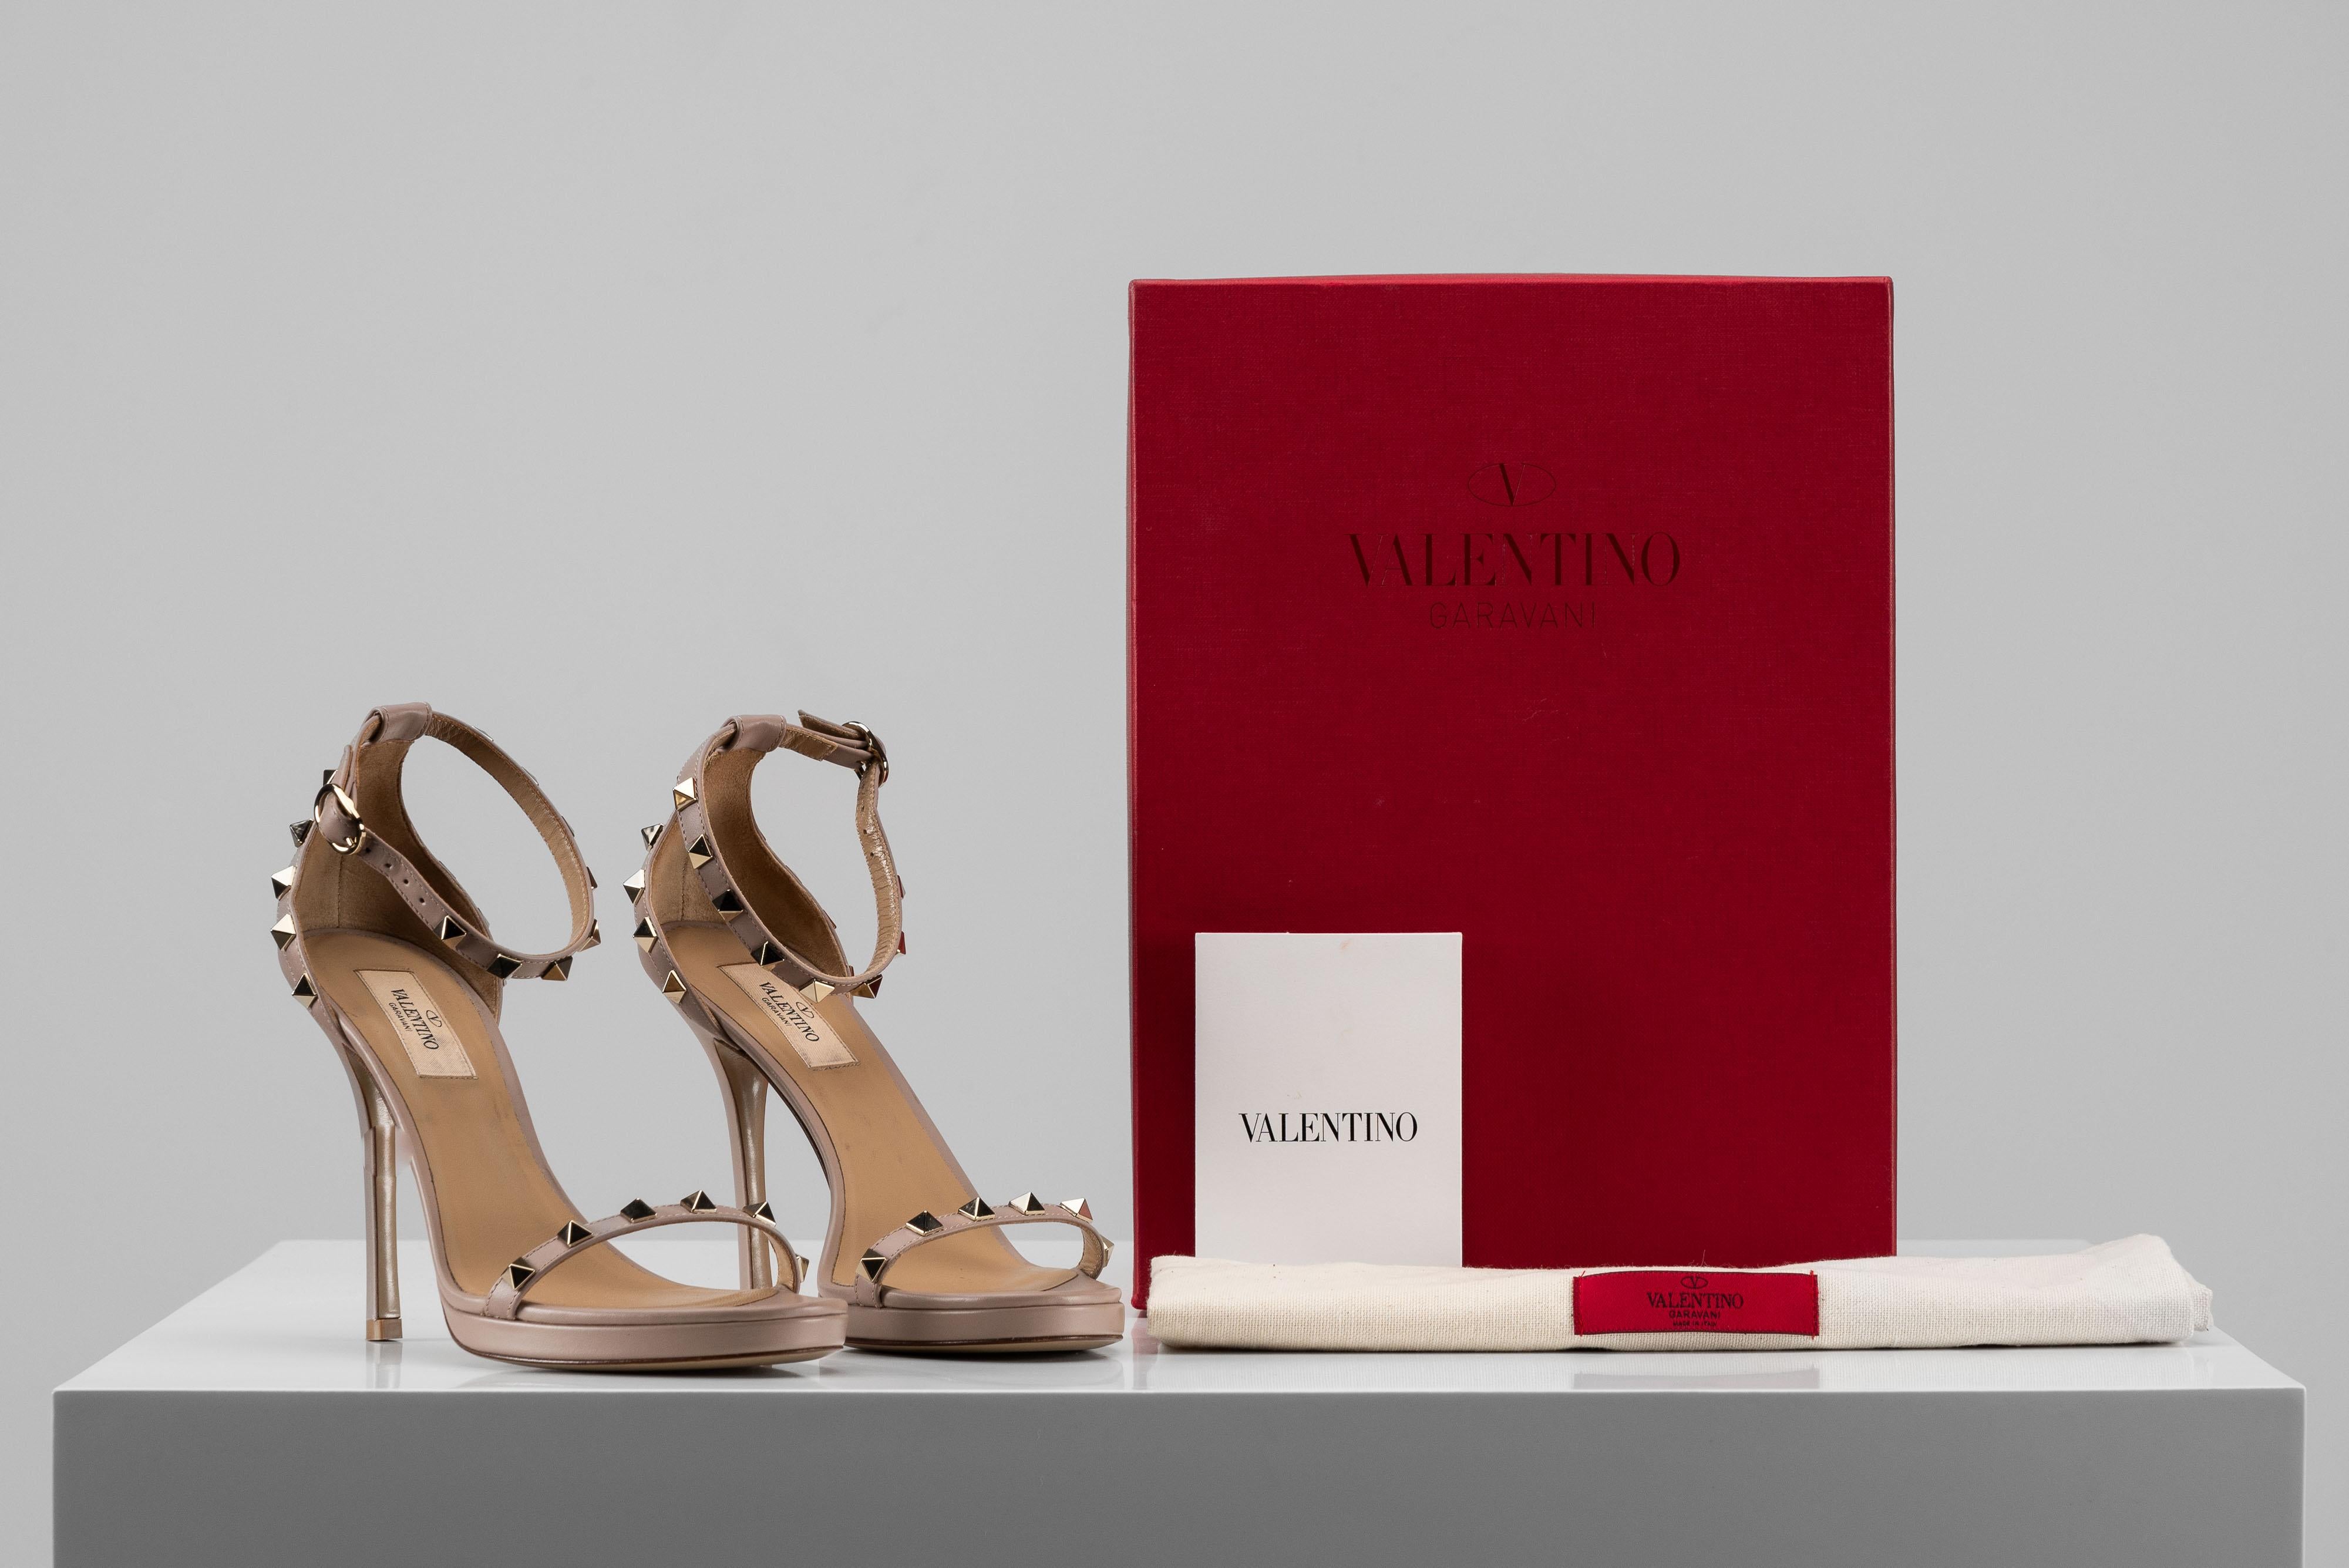 From the collection of SAVINETI we offer these pair of Valentino Ruckstud Heels:
- Brand: Valentino 
- Model: Rockstud Sandal Heels
- Size: 38 1/2
- Condition: Very Good 
- Year: 2020
- Extras: Full-Set (Dustbag, Box & Receipt)

Authenticity is our